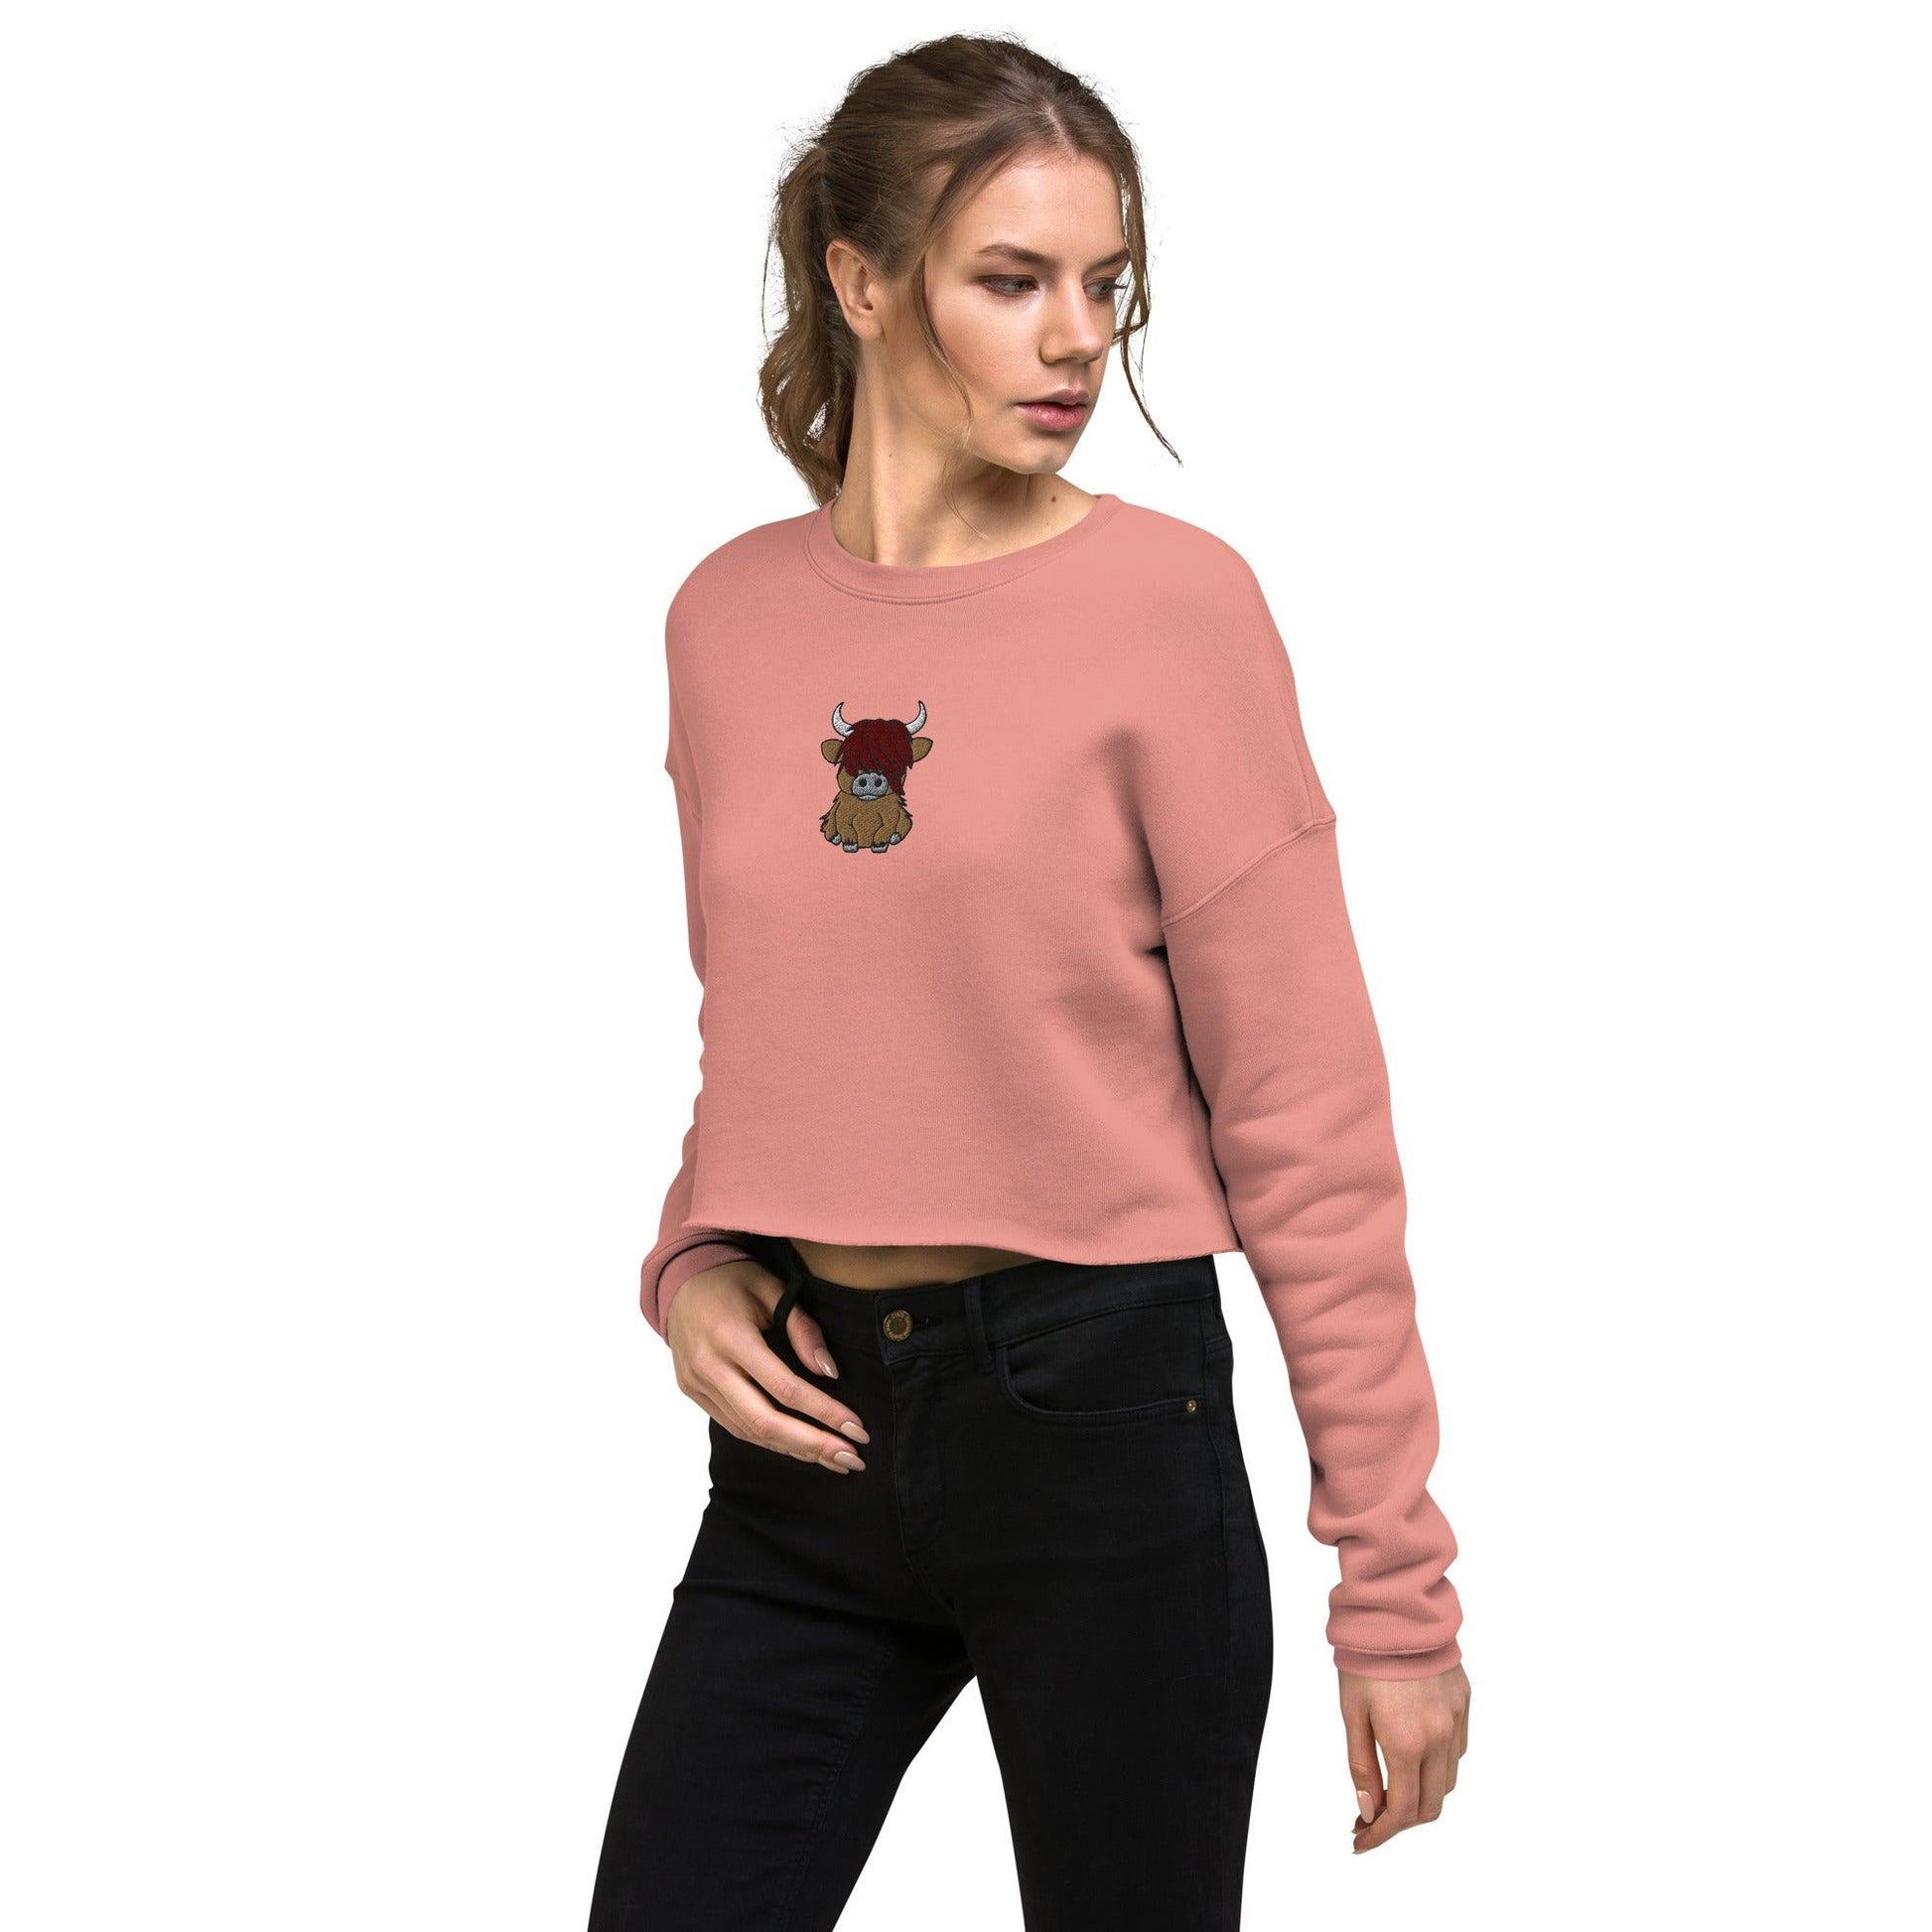 Scottish Highlands Cow Cropped Sweatshirt - Embroidered - The Global Wanderer